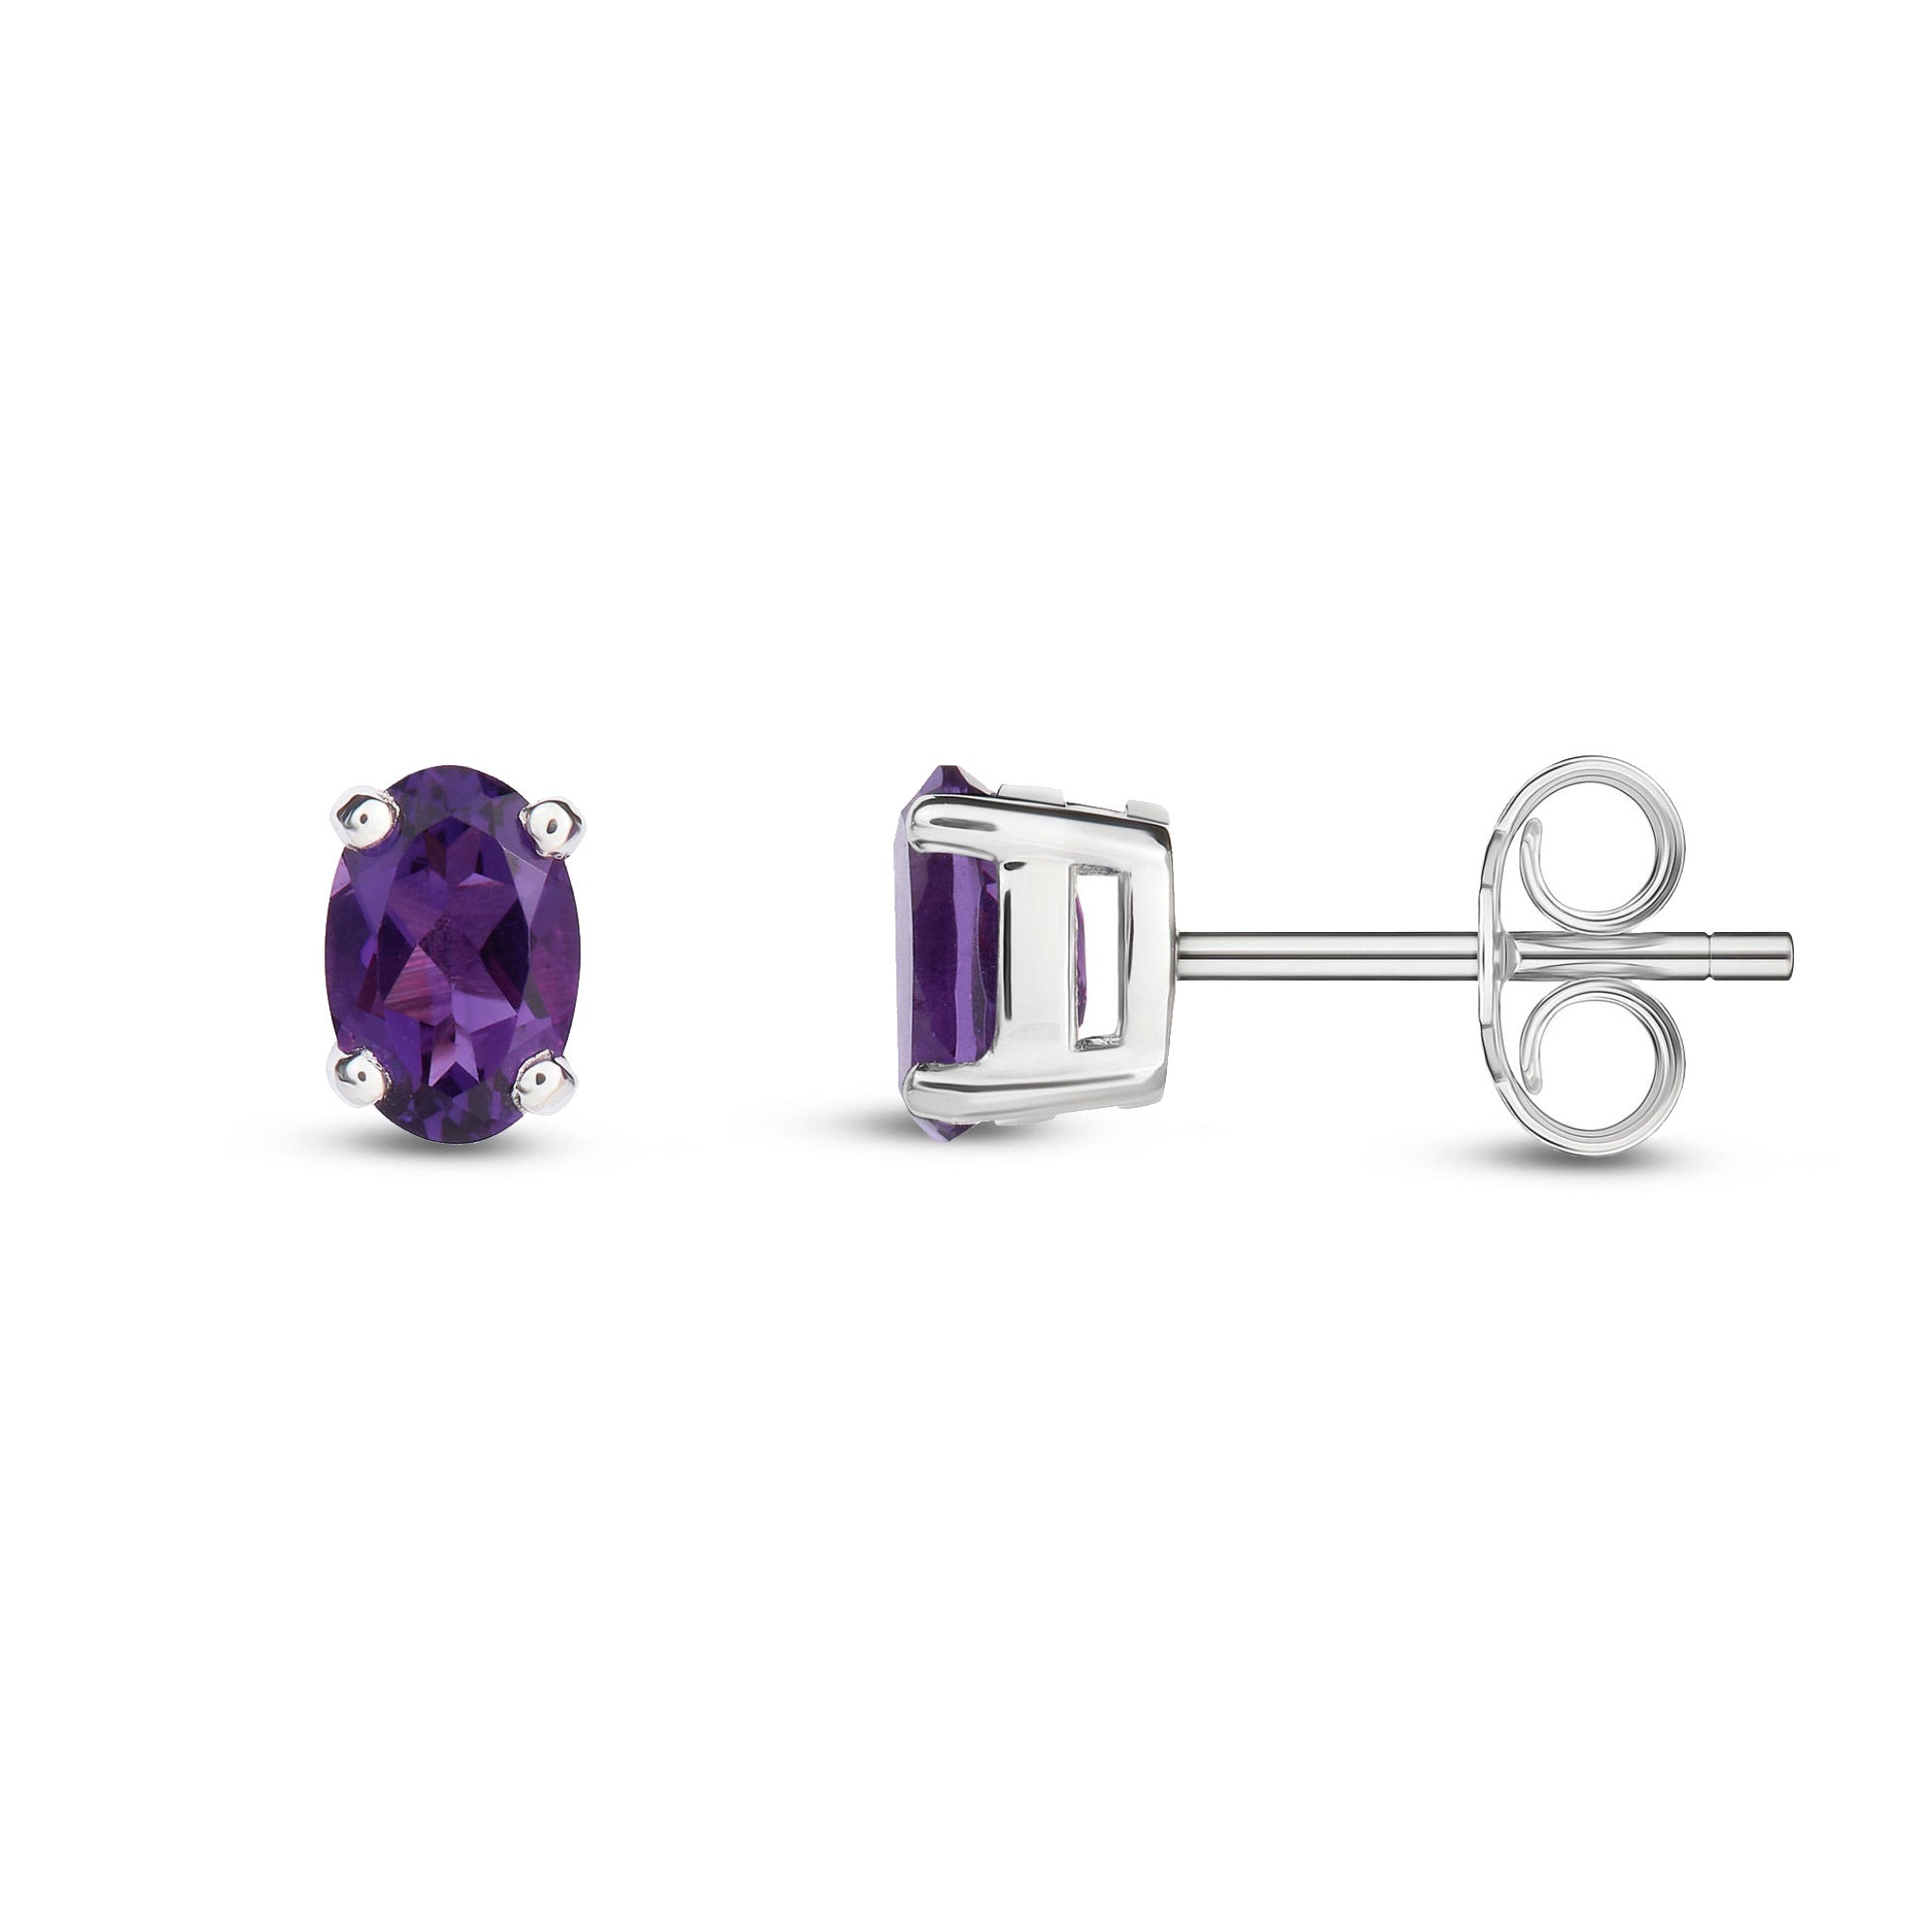 9ct White Gold Amethyst 4 Claw Oval Stud Earrings